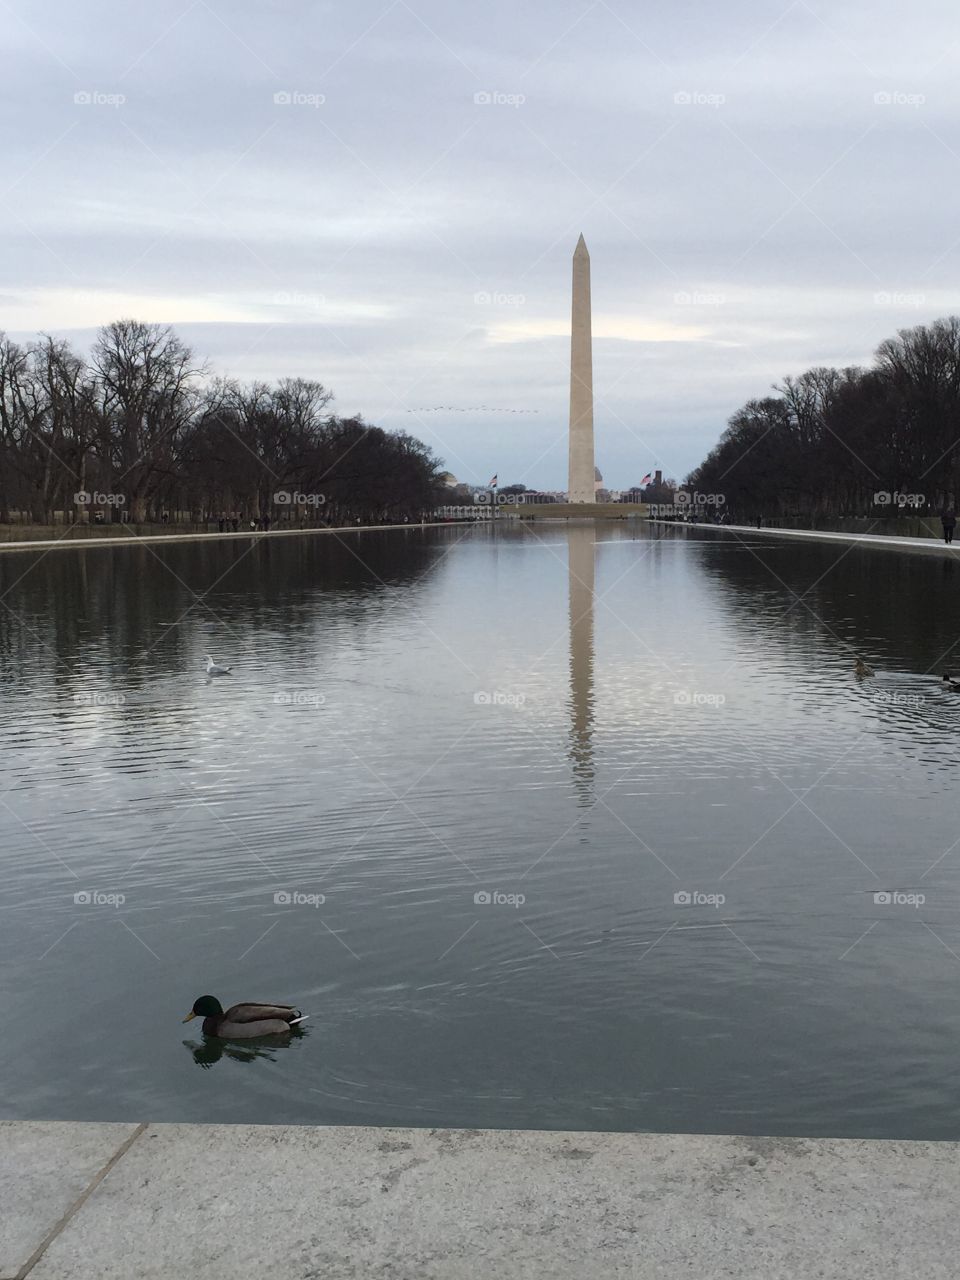 Washington Monument and Reflection Pool. Washington Monument with a duck swimming in the Reflection Pool.